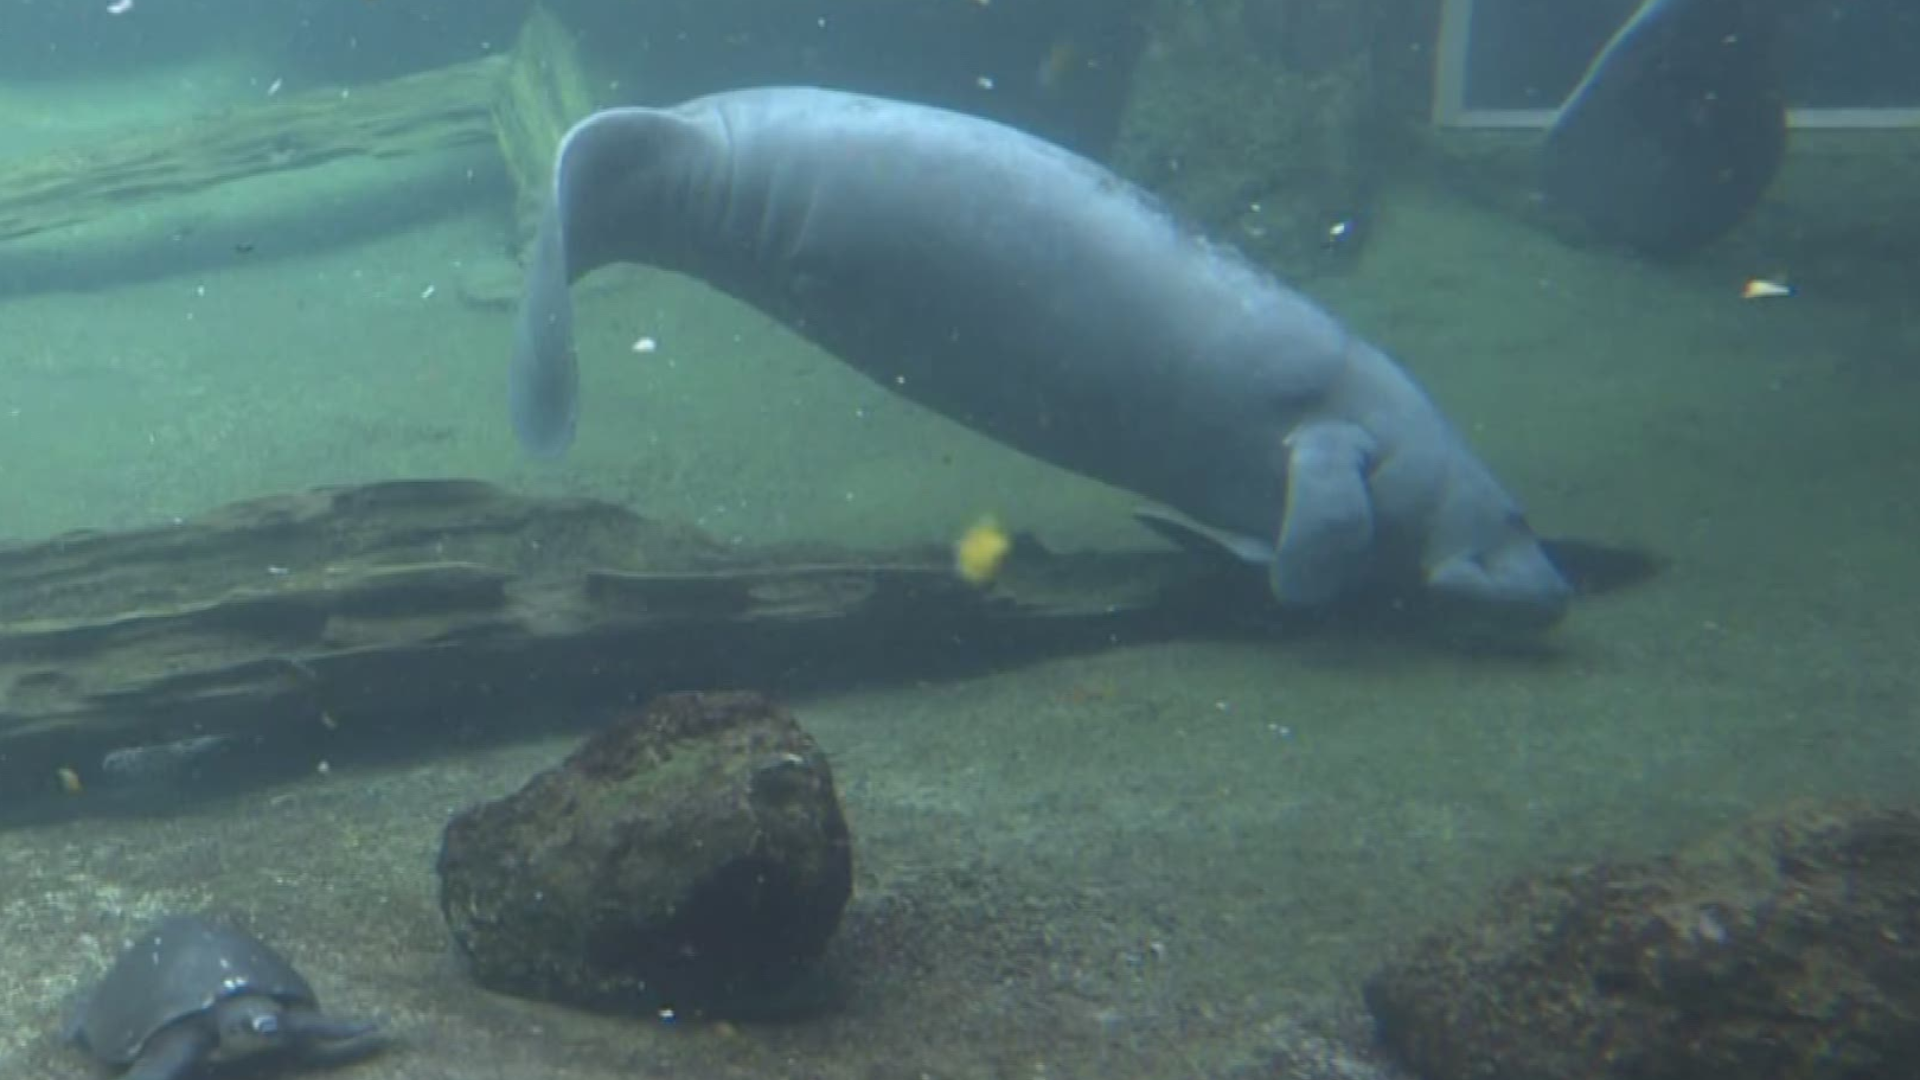 According to the U.S. Fish and Wildlife Organization, there are at least 13,000 manatees in the U.S. https://bit.ly/39lt1yS